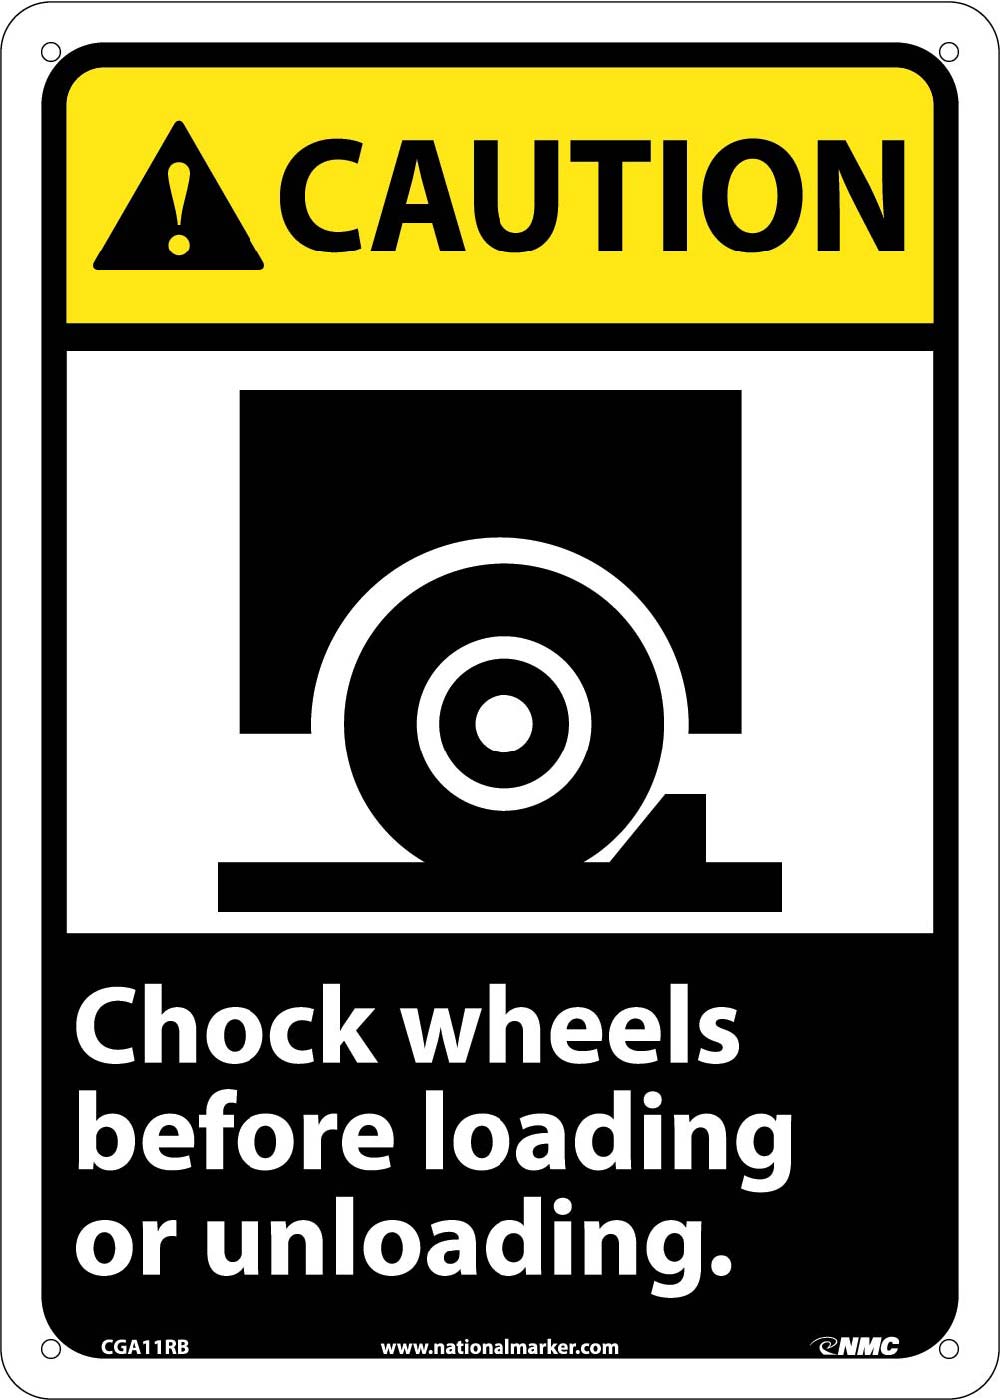 Caution Chock Wheels Before Loading Or Unloading Sign-eSafety Supplies, Inc